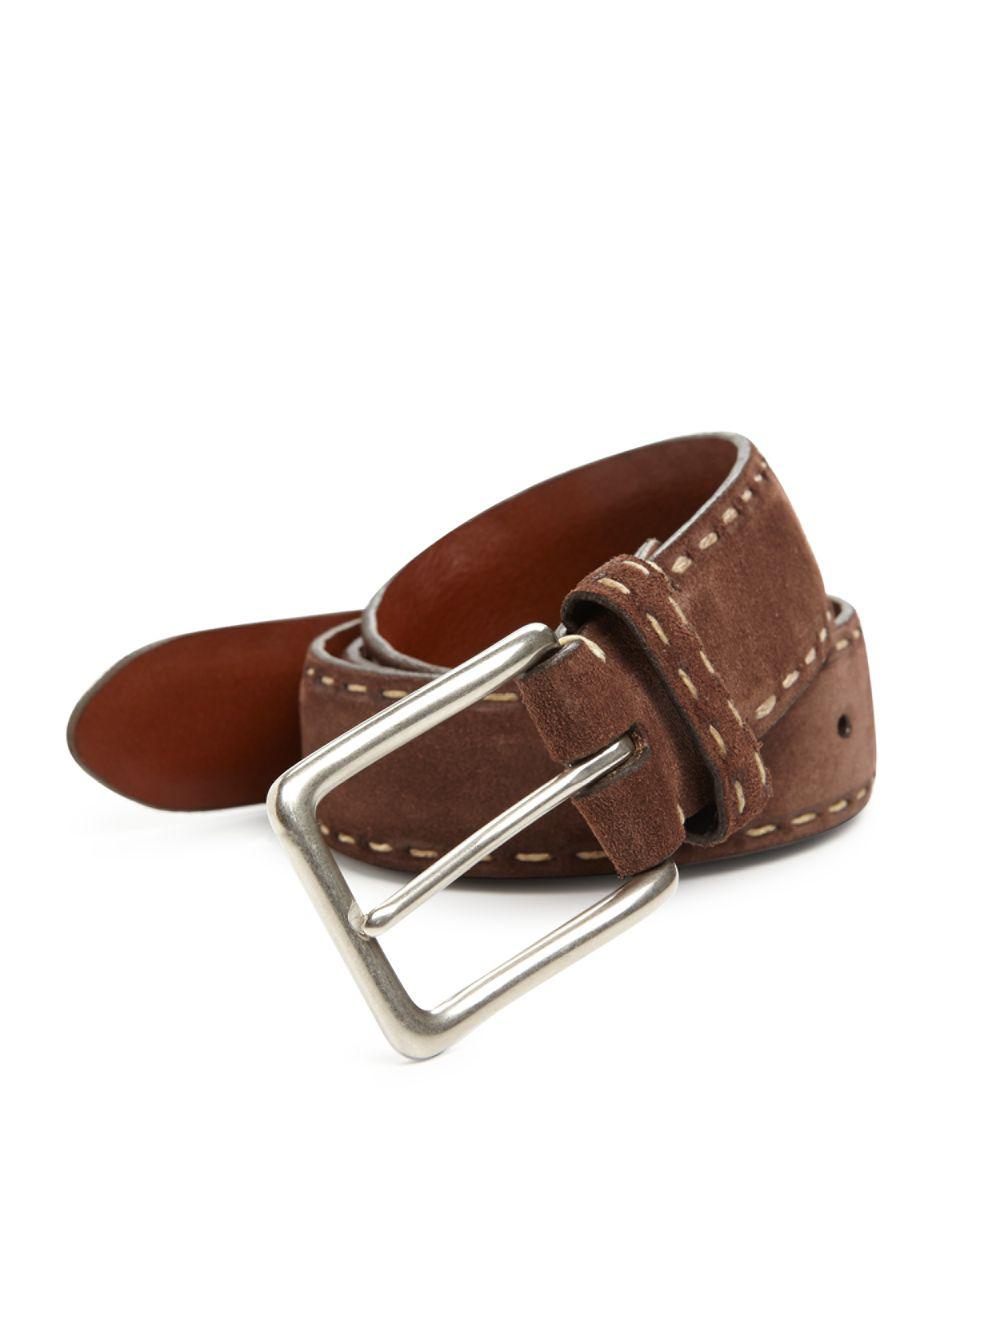 Lyst - Saks Fifth Avenue Collection Contrast Stitch Suede Belt in Brown for Men